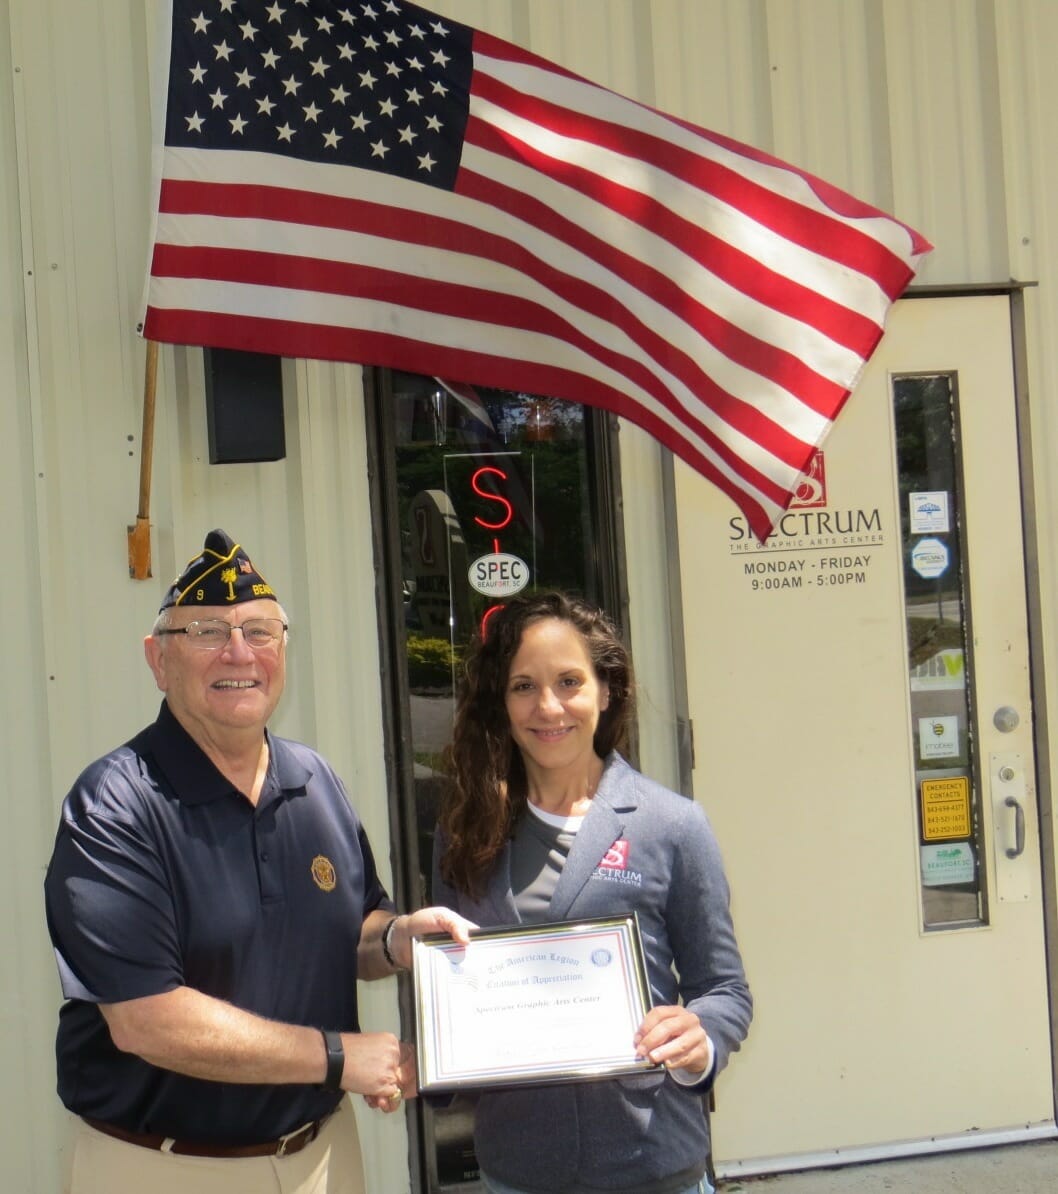 American Legion Beaufort Post 9 is striving to promote both patriotism and businesses in the Beaufort area by calling attention to those that proudly display the U.S. flag at their location. Post 9 presents those enterprises with a framed certificate thanking them. Here, Terri Ely of Spectrum Graphic Arts accepts a certificate from Post Commander Chuck Lurey.